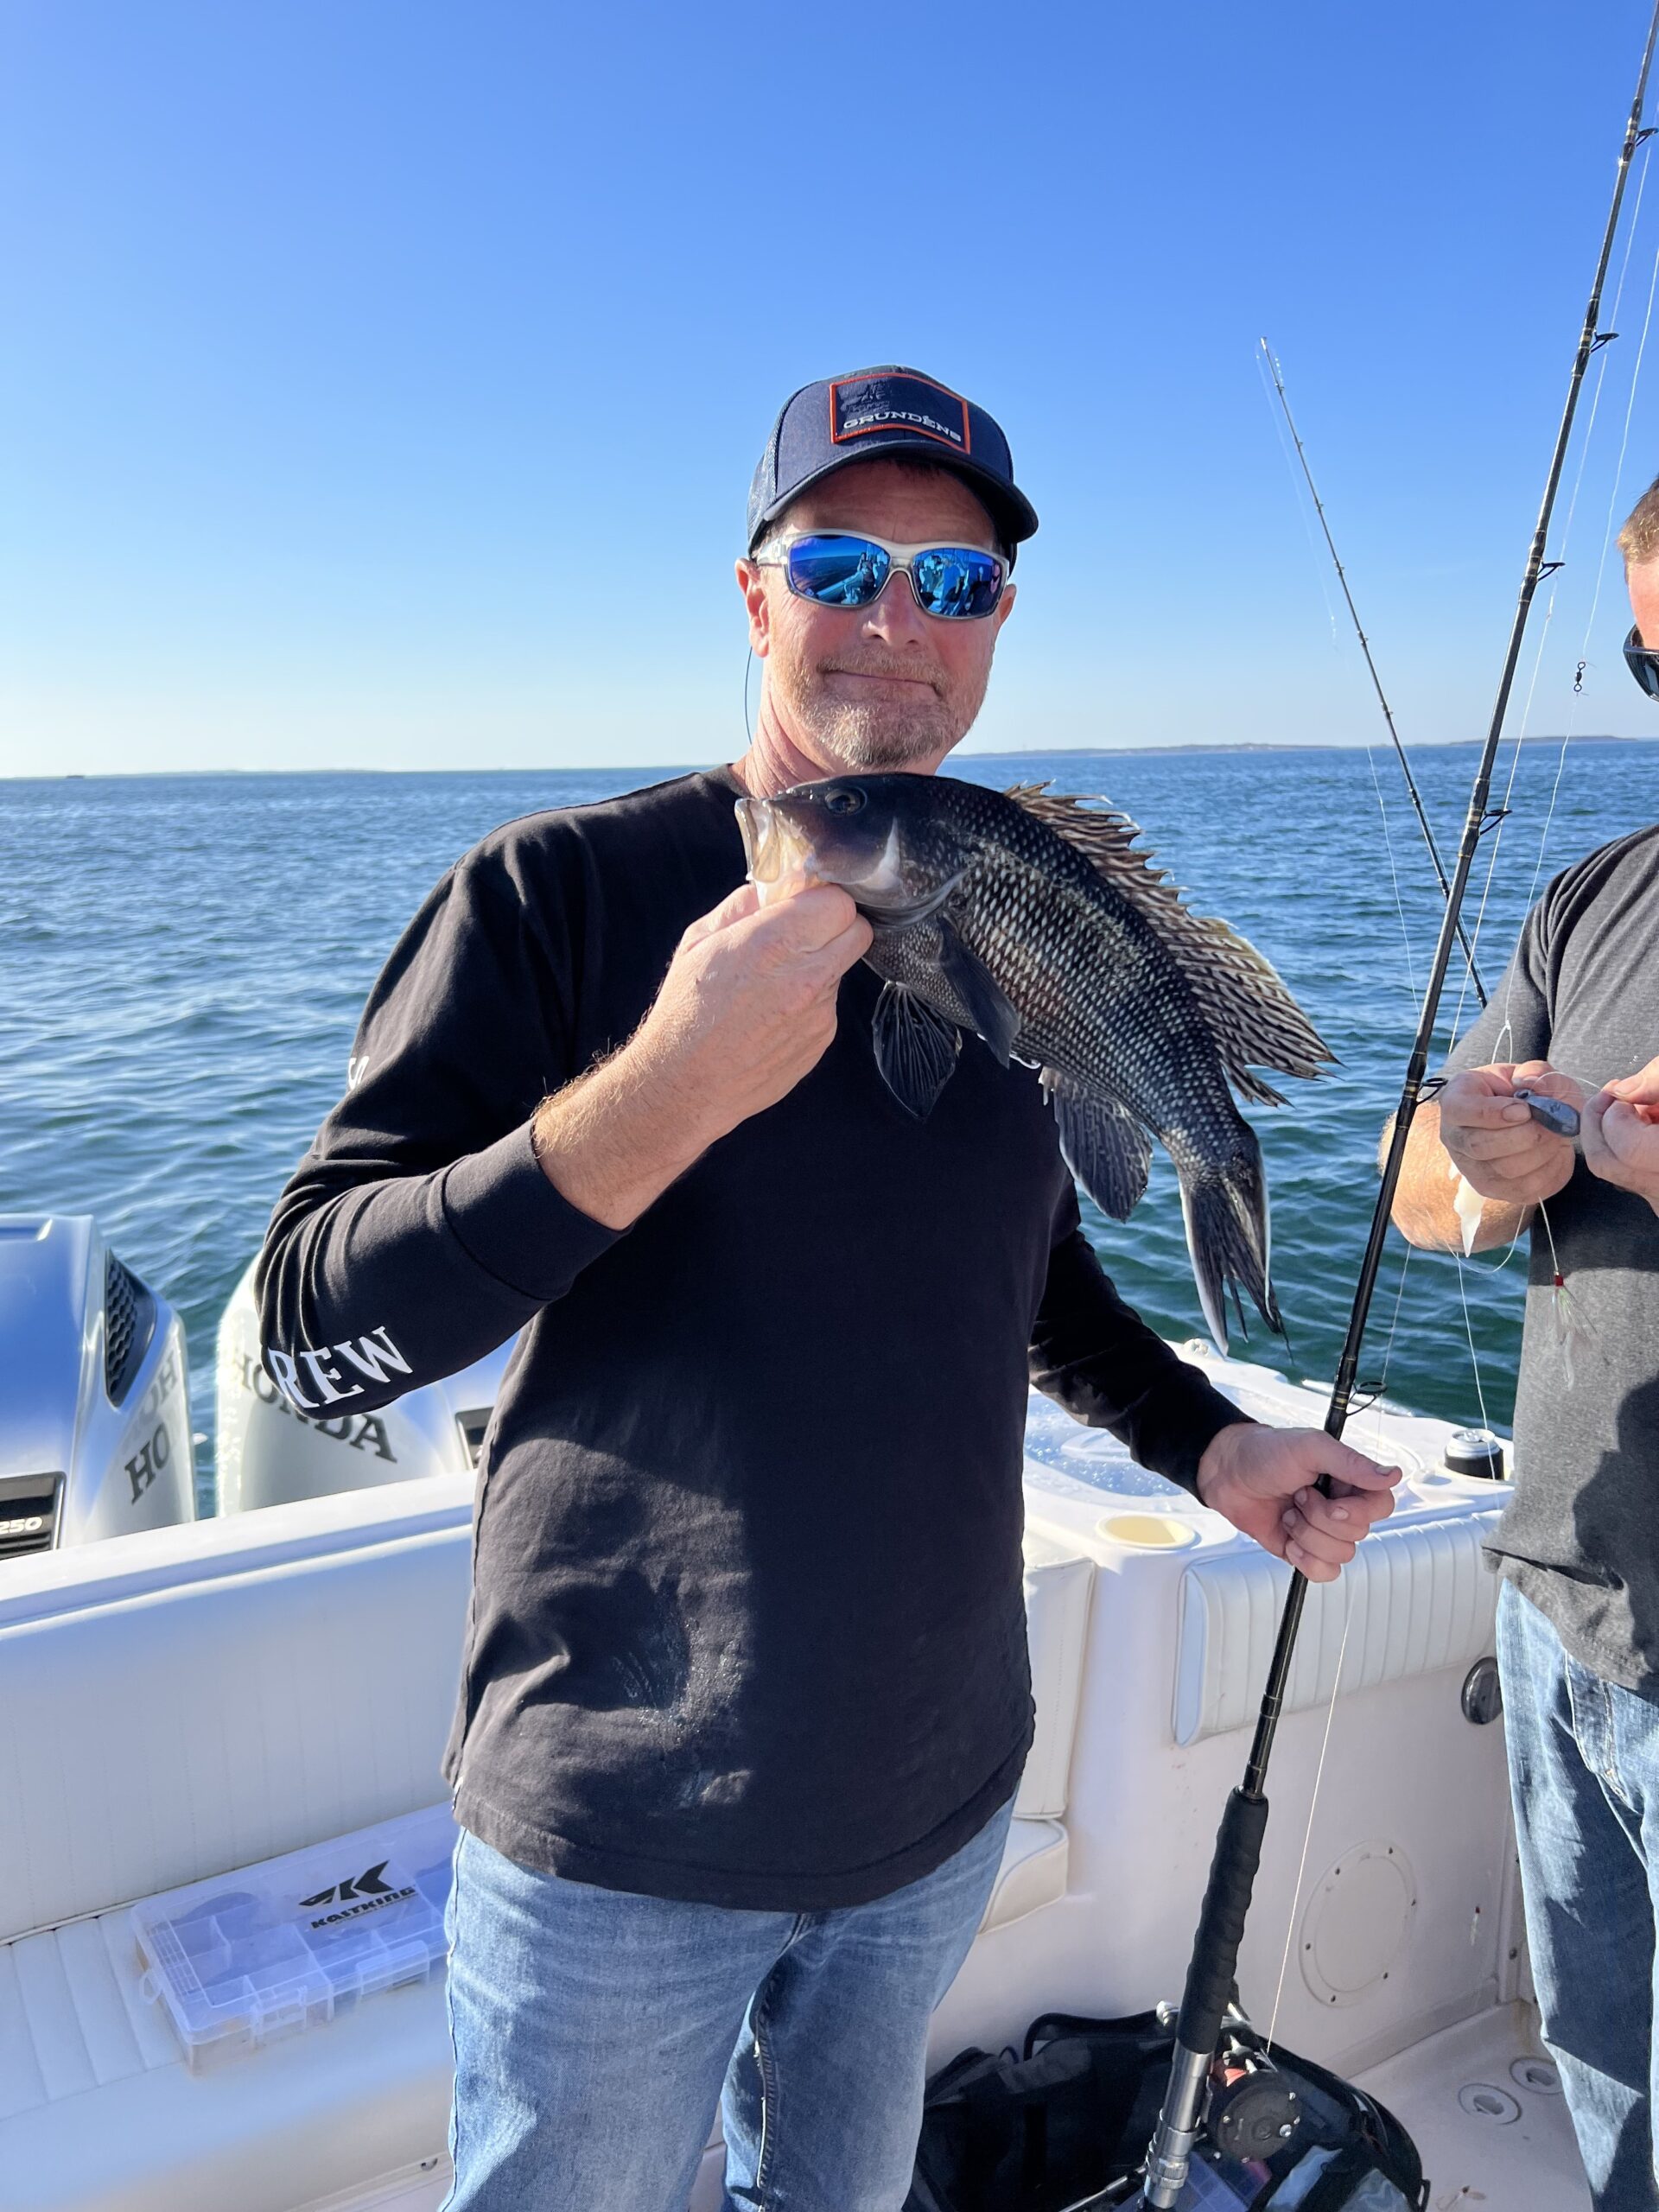 Good seabass fishing continues, as shown by Mark Daniels.